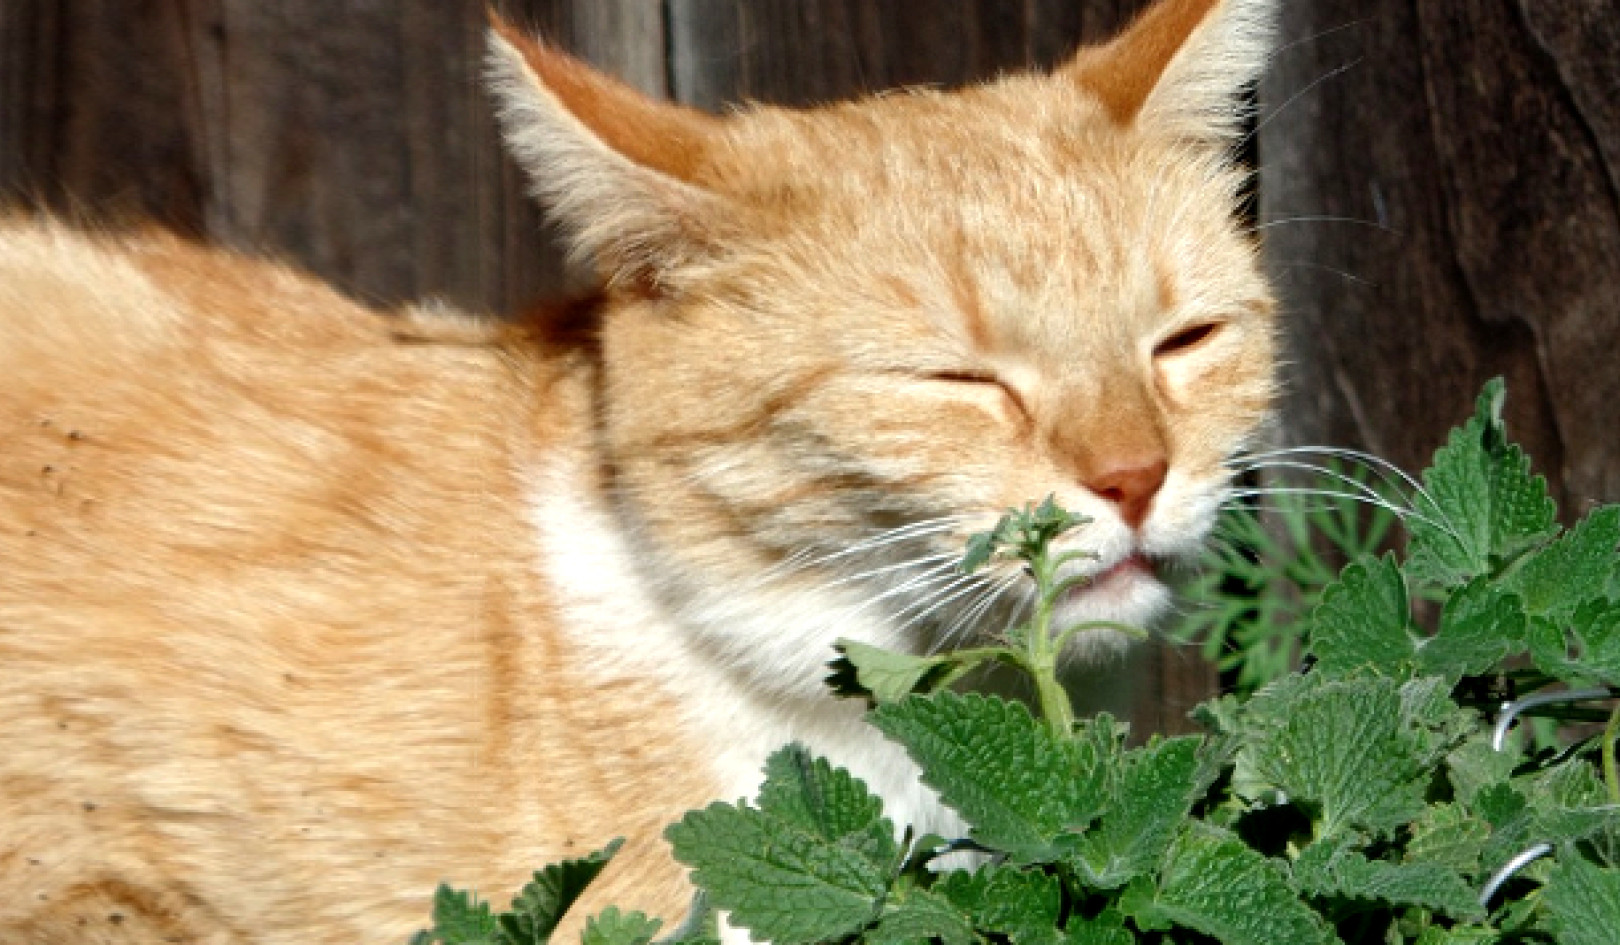 A Natural Bug Repellent Recipe: Even Your Cat Might Like It